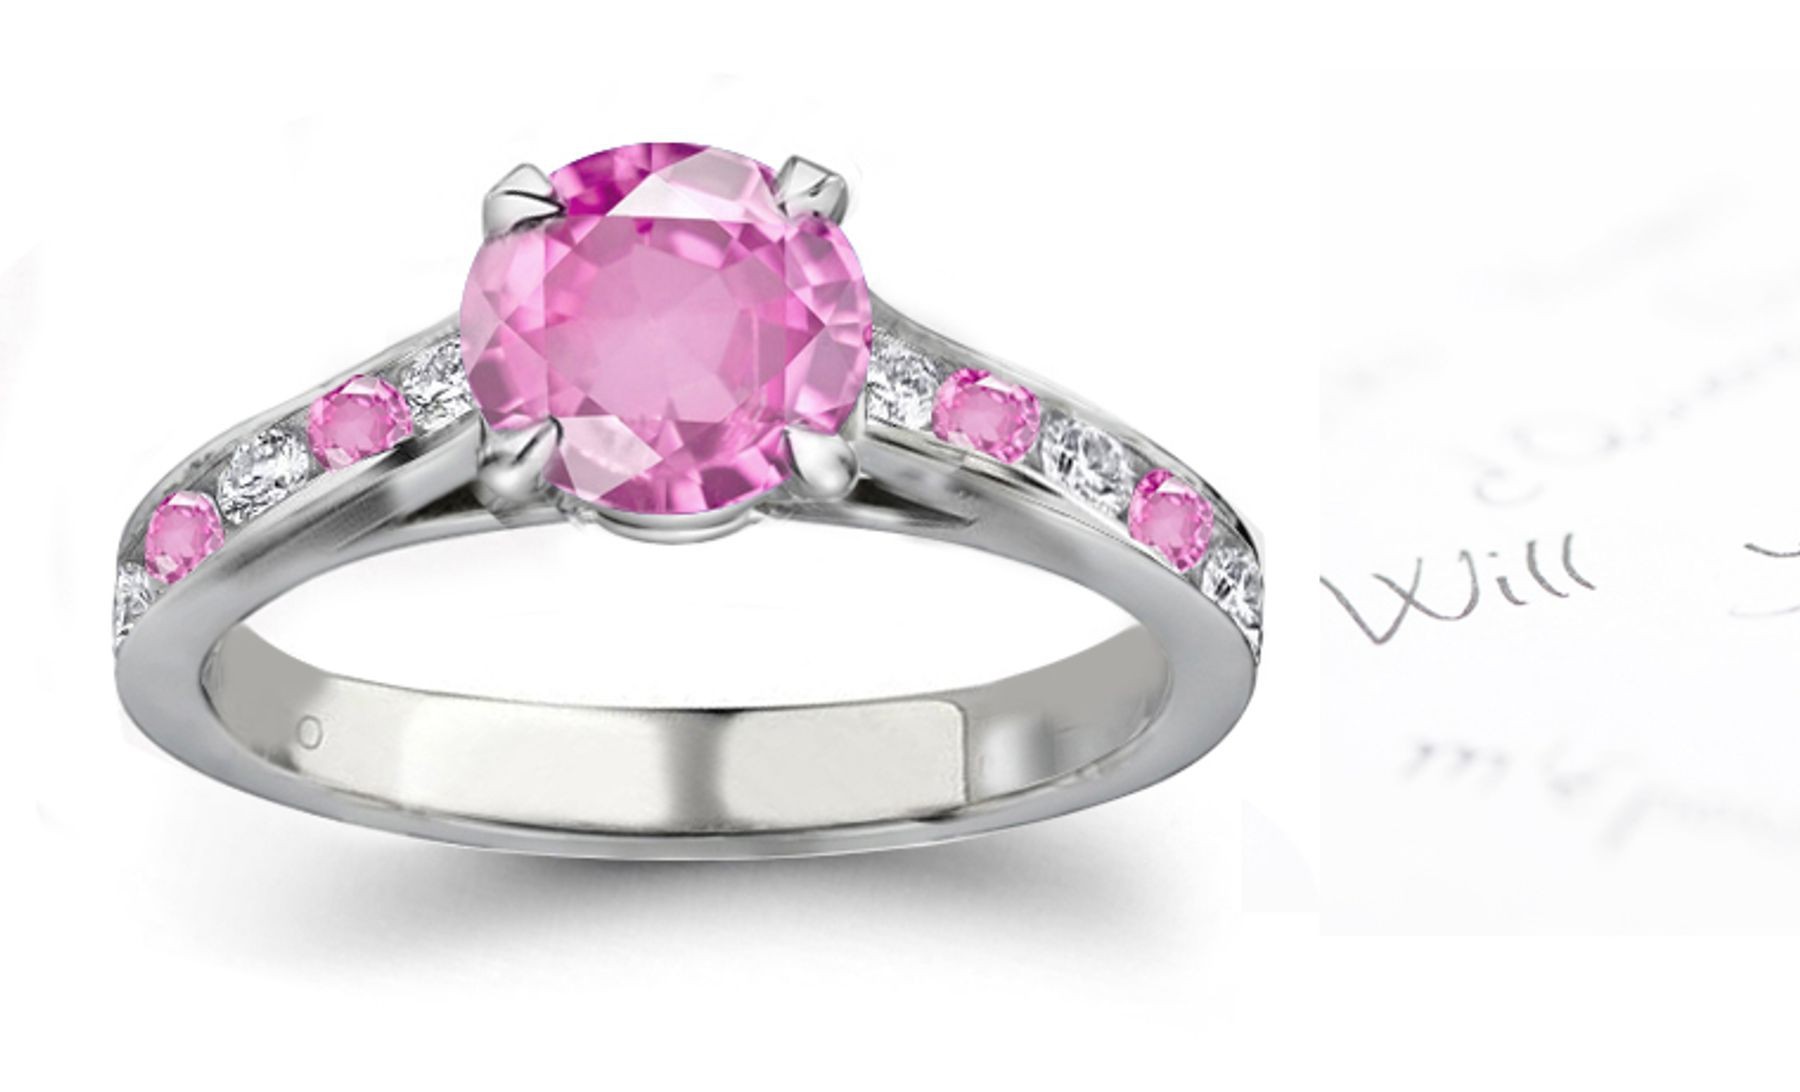 Red Sea Gallery: Round Ladies Pink Sapphire & Diamond Gold Ring 1 to 5 carat weight